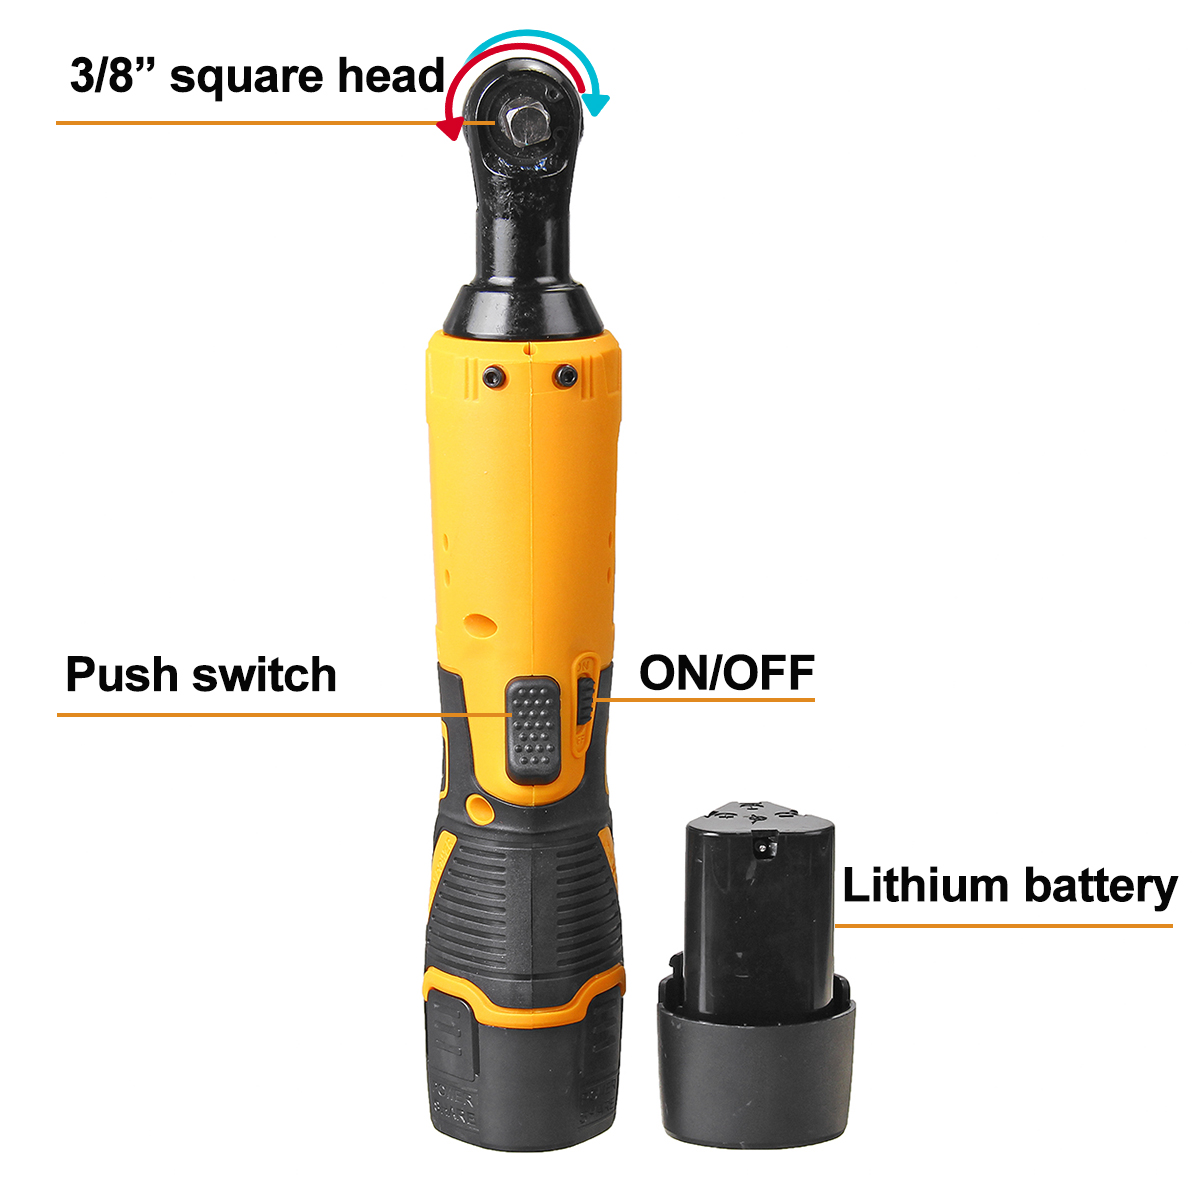 7200mah-Power-Cordless-Ratchet-Wrench-38quot-12V-Li-ion-Electric-Wrench-Max-Torque-45-Compact-Size-1560566-6